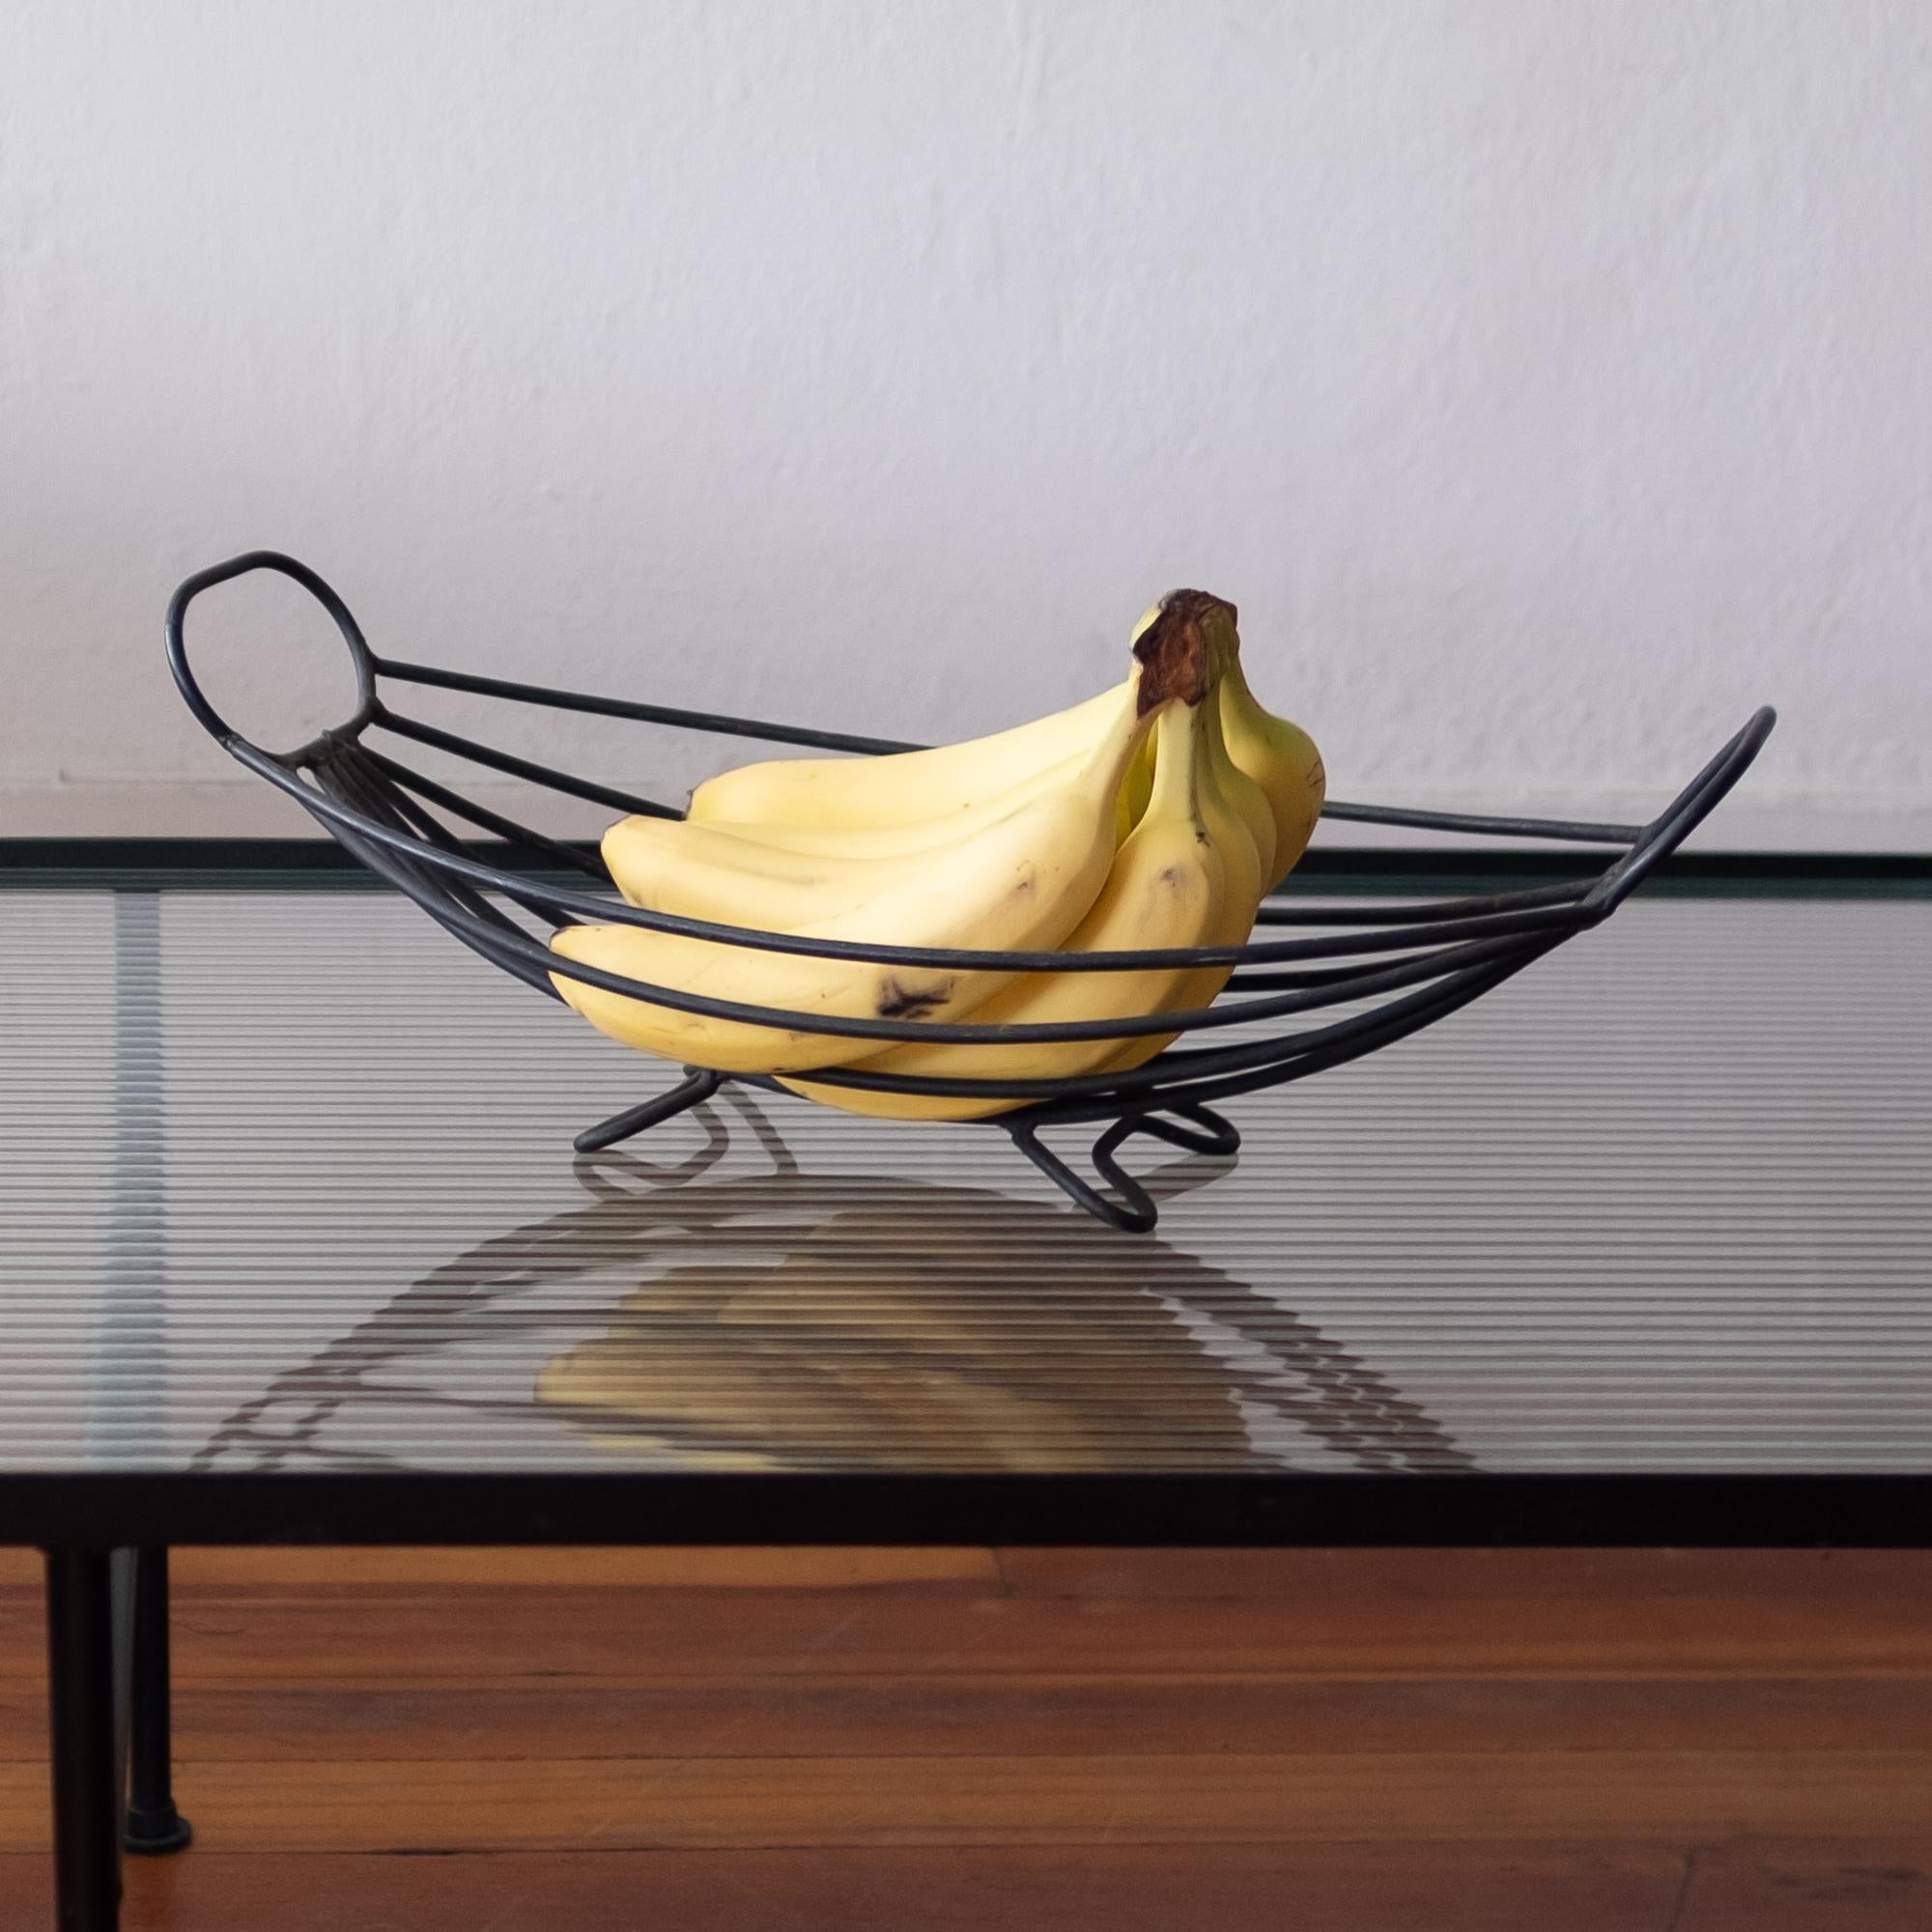 1950s Modernist  Atomic Fruit Bowl in the style of Ferris Shacknove  In Good Condition For Sale In San Diego, CA